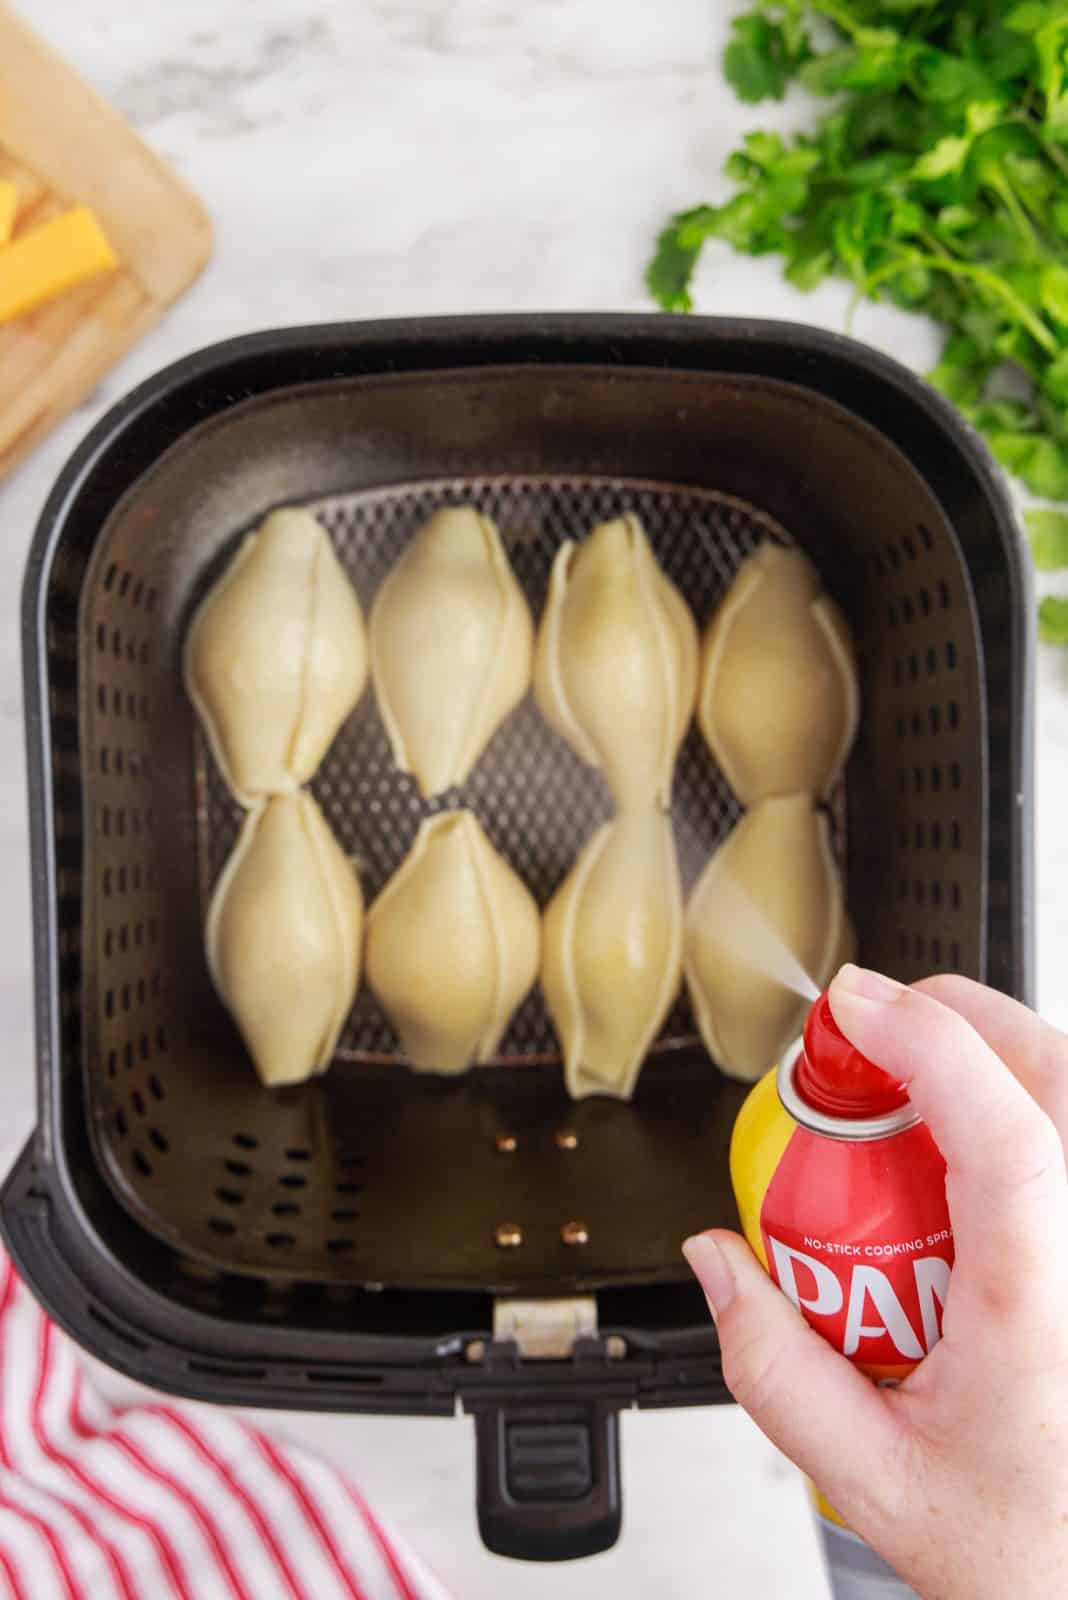 Stuffed Shells being sprayed with non-stick cooking spray.